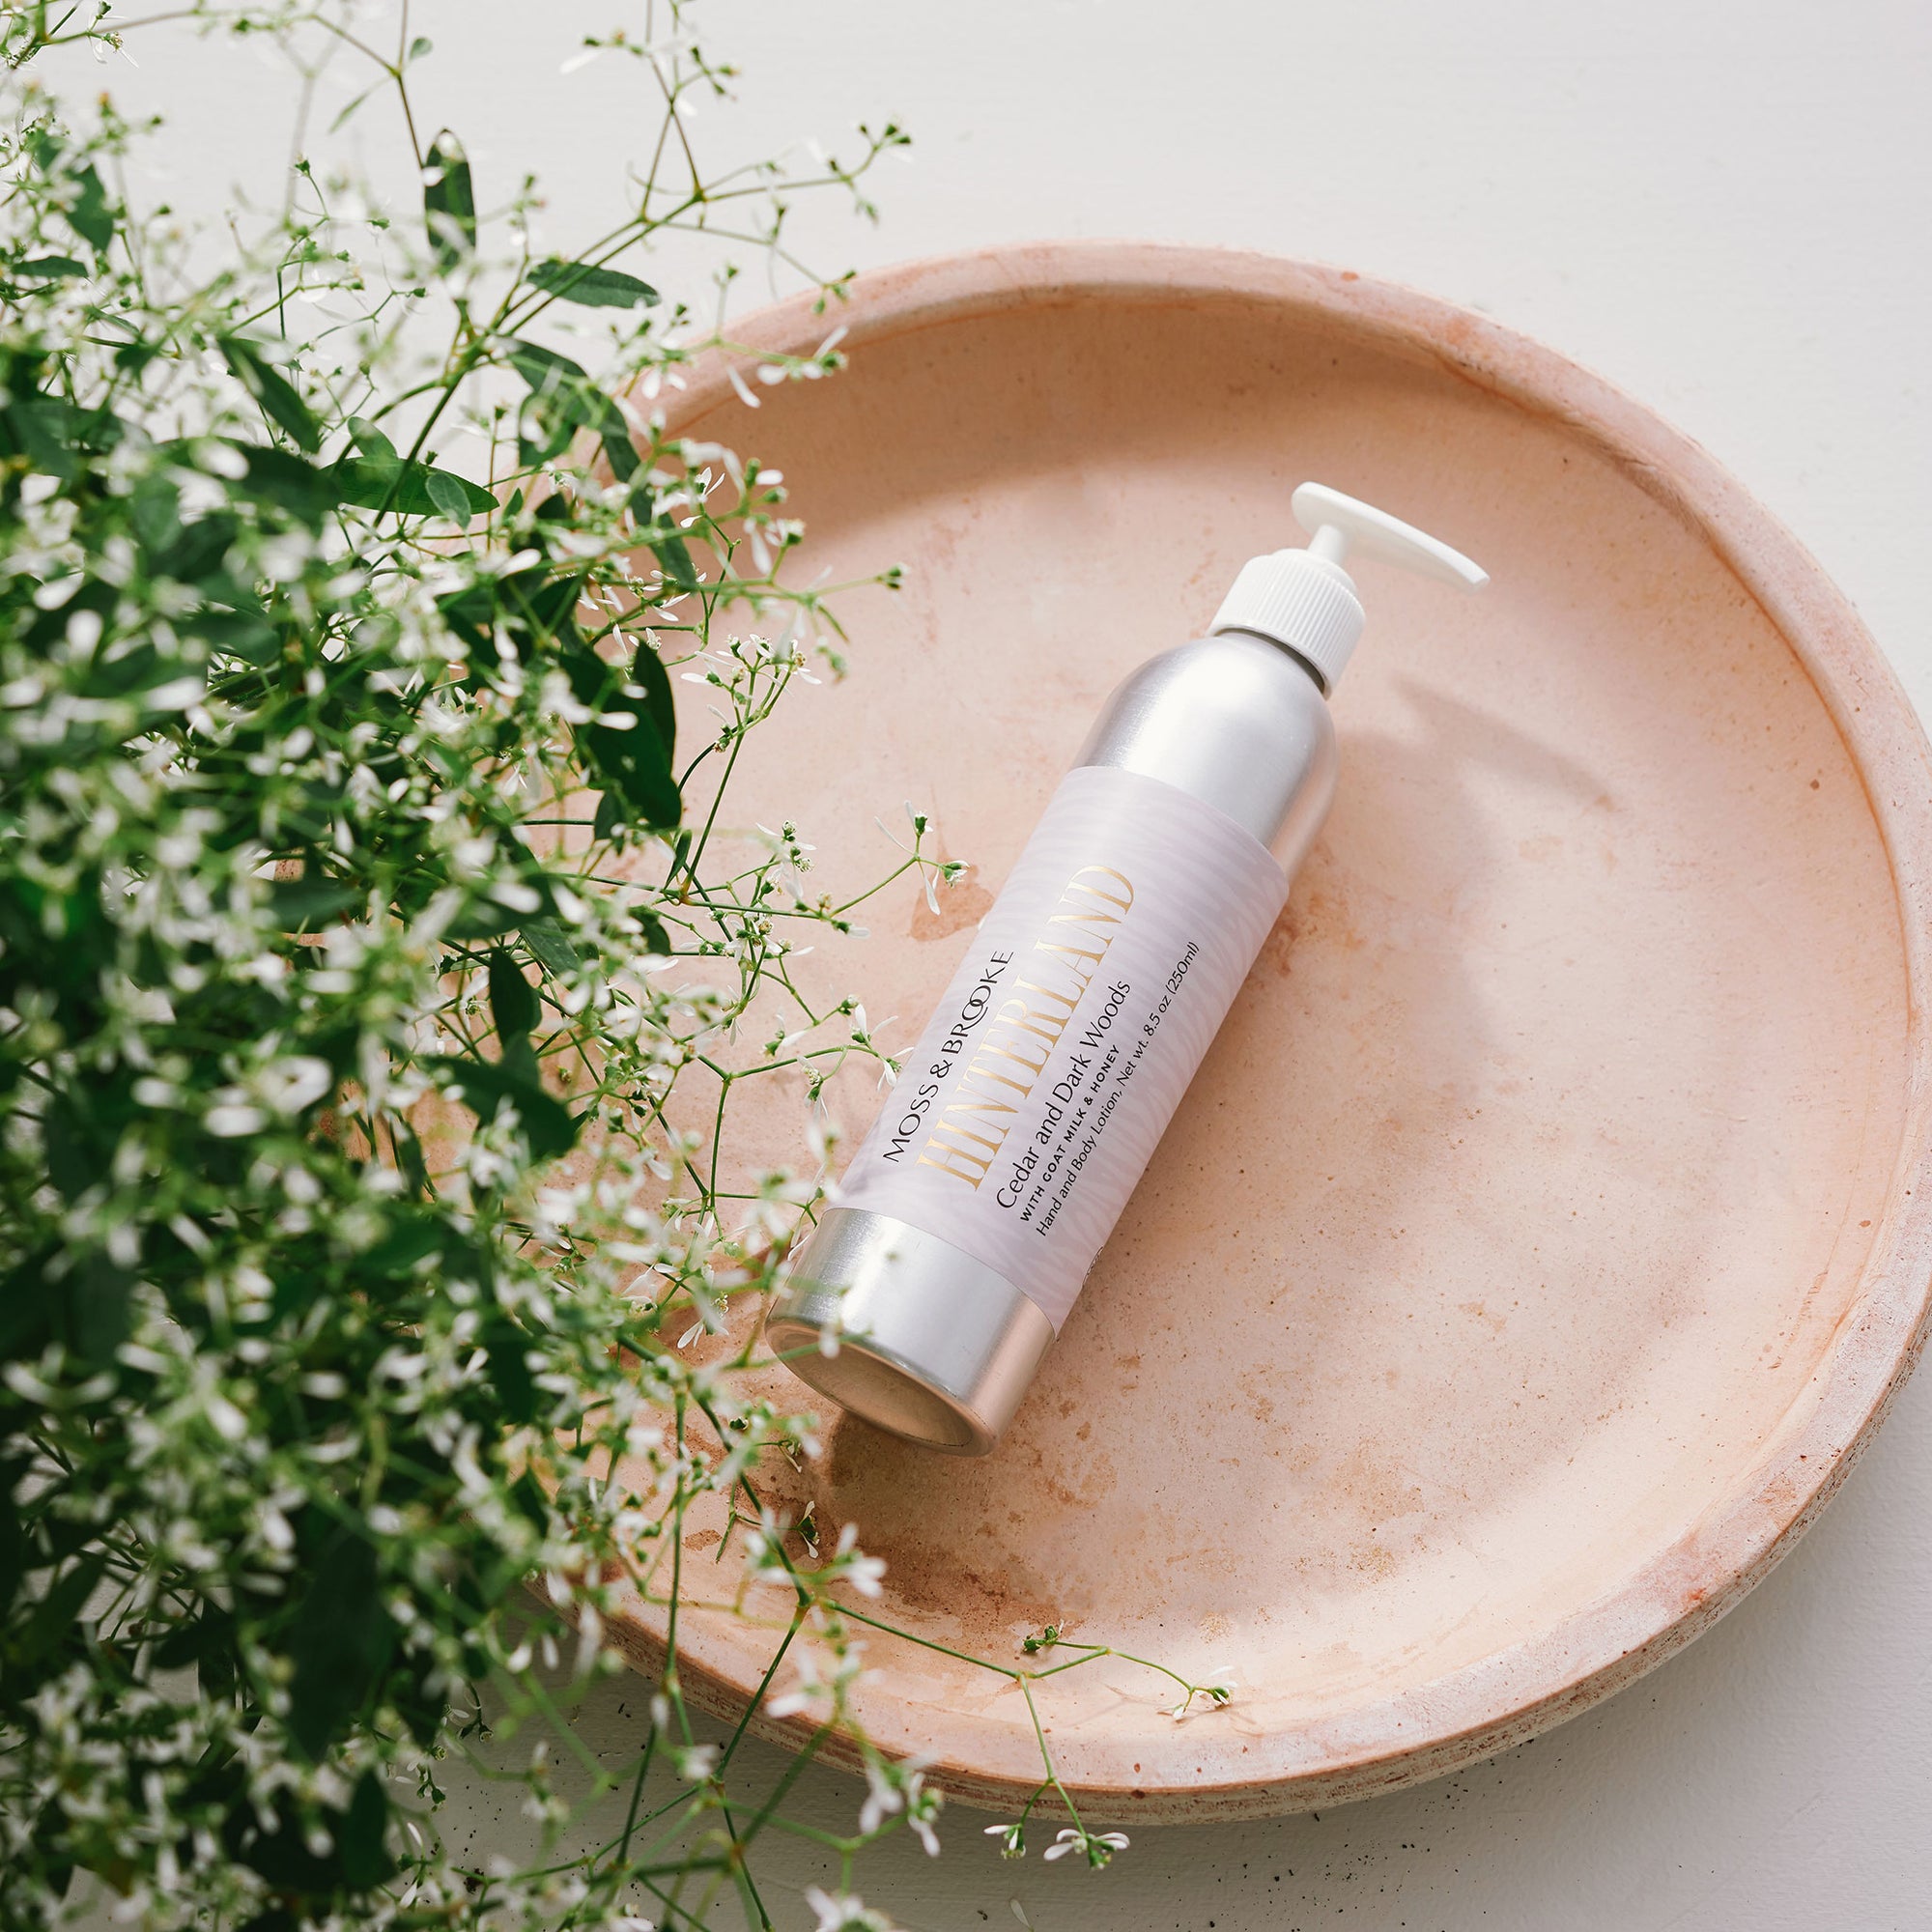 Bottle of Hinterland Body lotion by Moss & Brooke with flowers and greenery in background. Aluminum silver bottle with white pump and light grey label with gold text, sophisticated and luxurious.